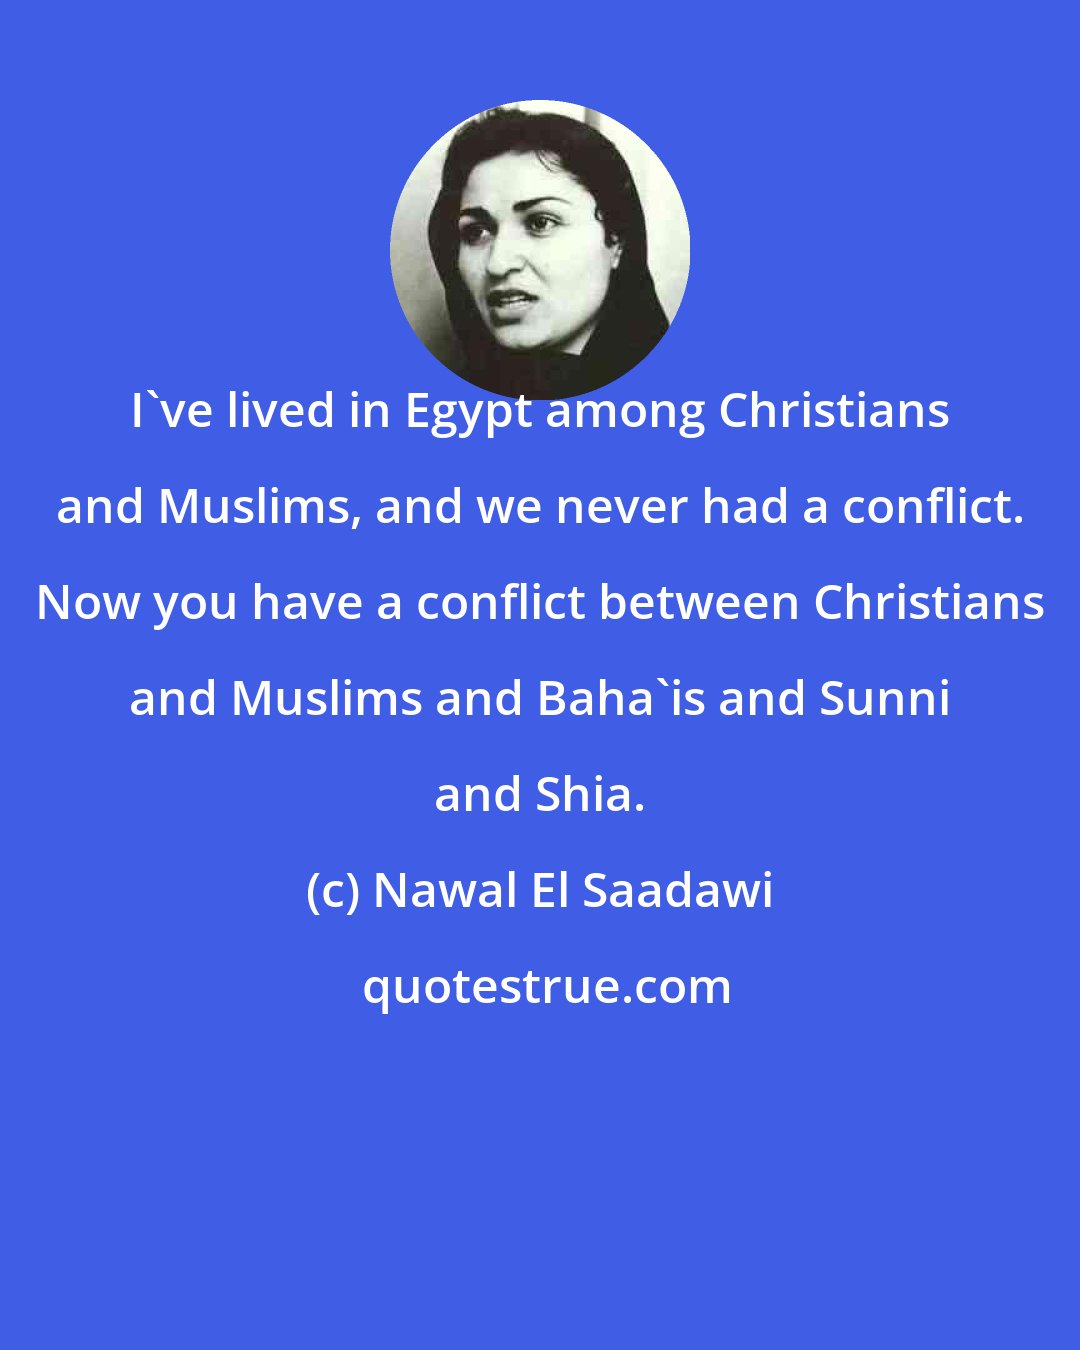 Nawal El Saadawi: I've lived in Egypt among Christians and Muslims, and we never had a conflict. Now you have a conflict between Christians and Muslims and Baha'is and Sunni and Shia.